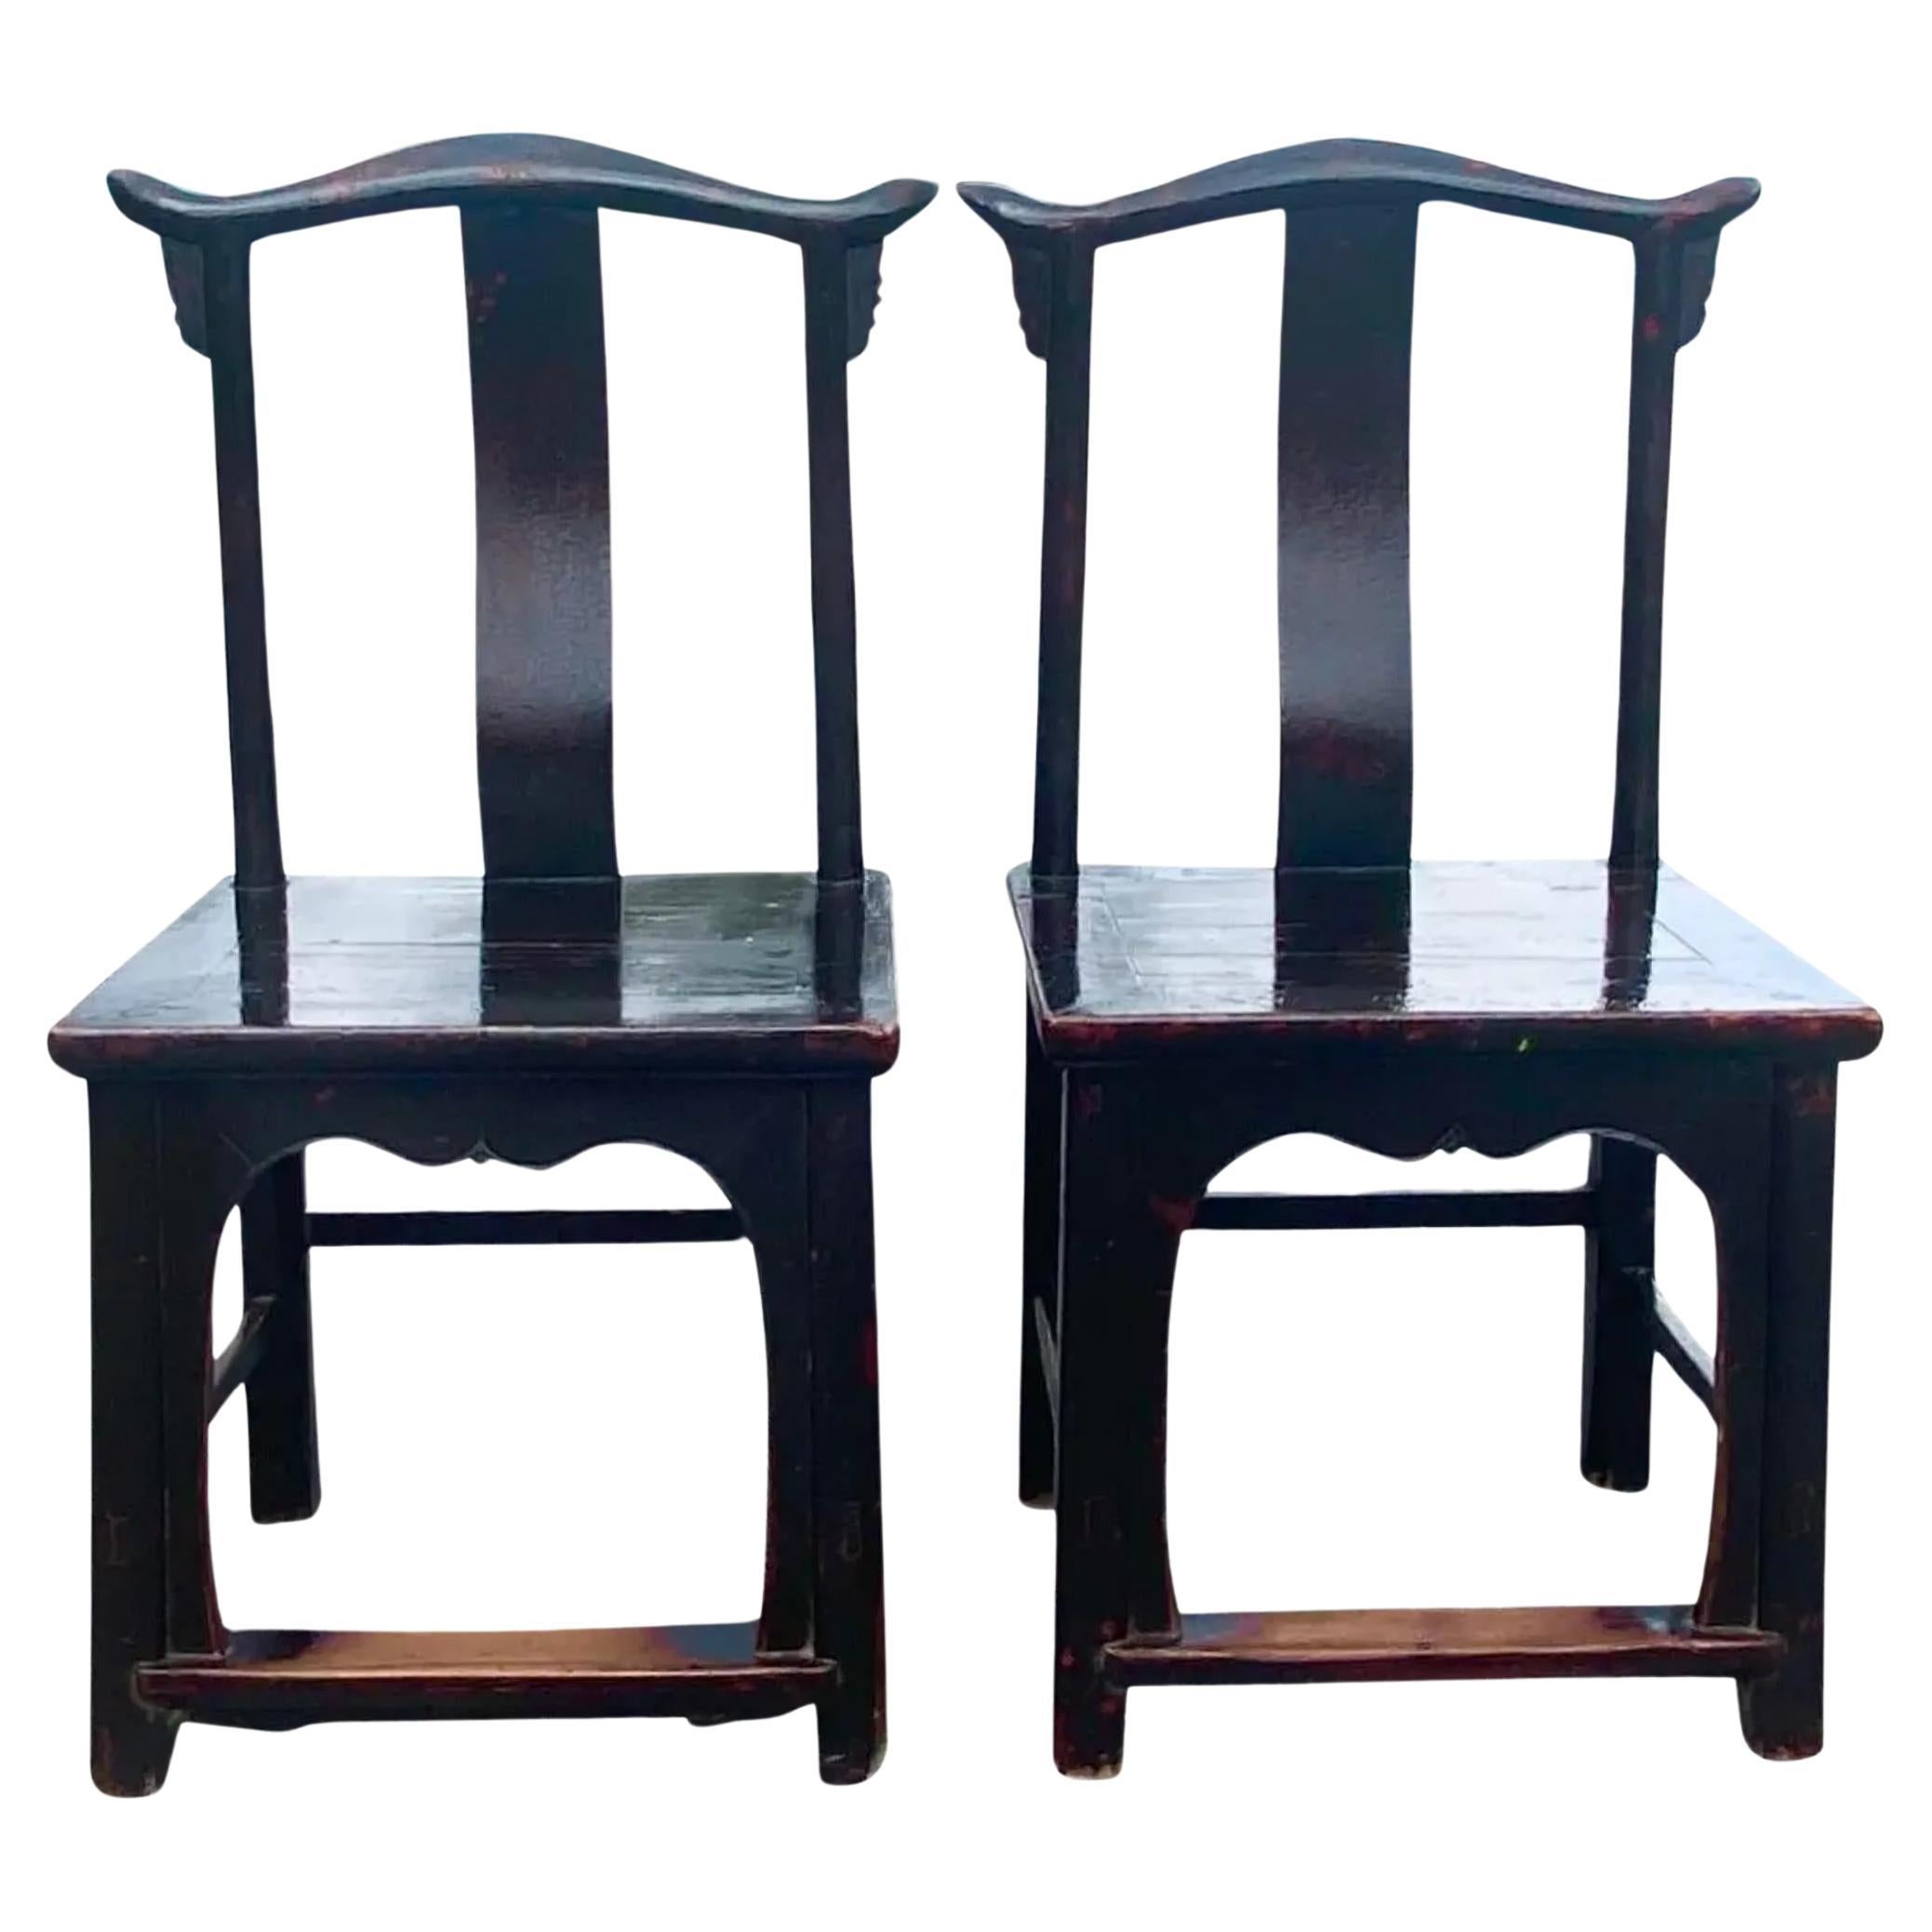 Vintage Asian Emperor Chairs - a Pair For Sale